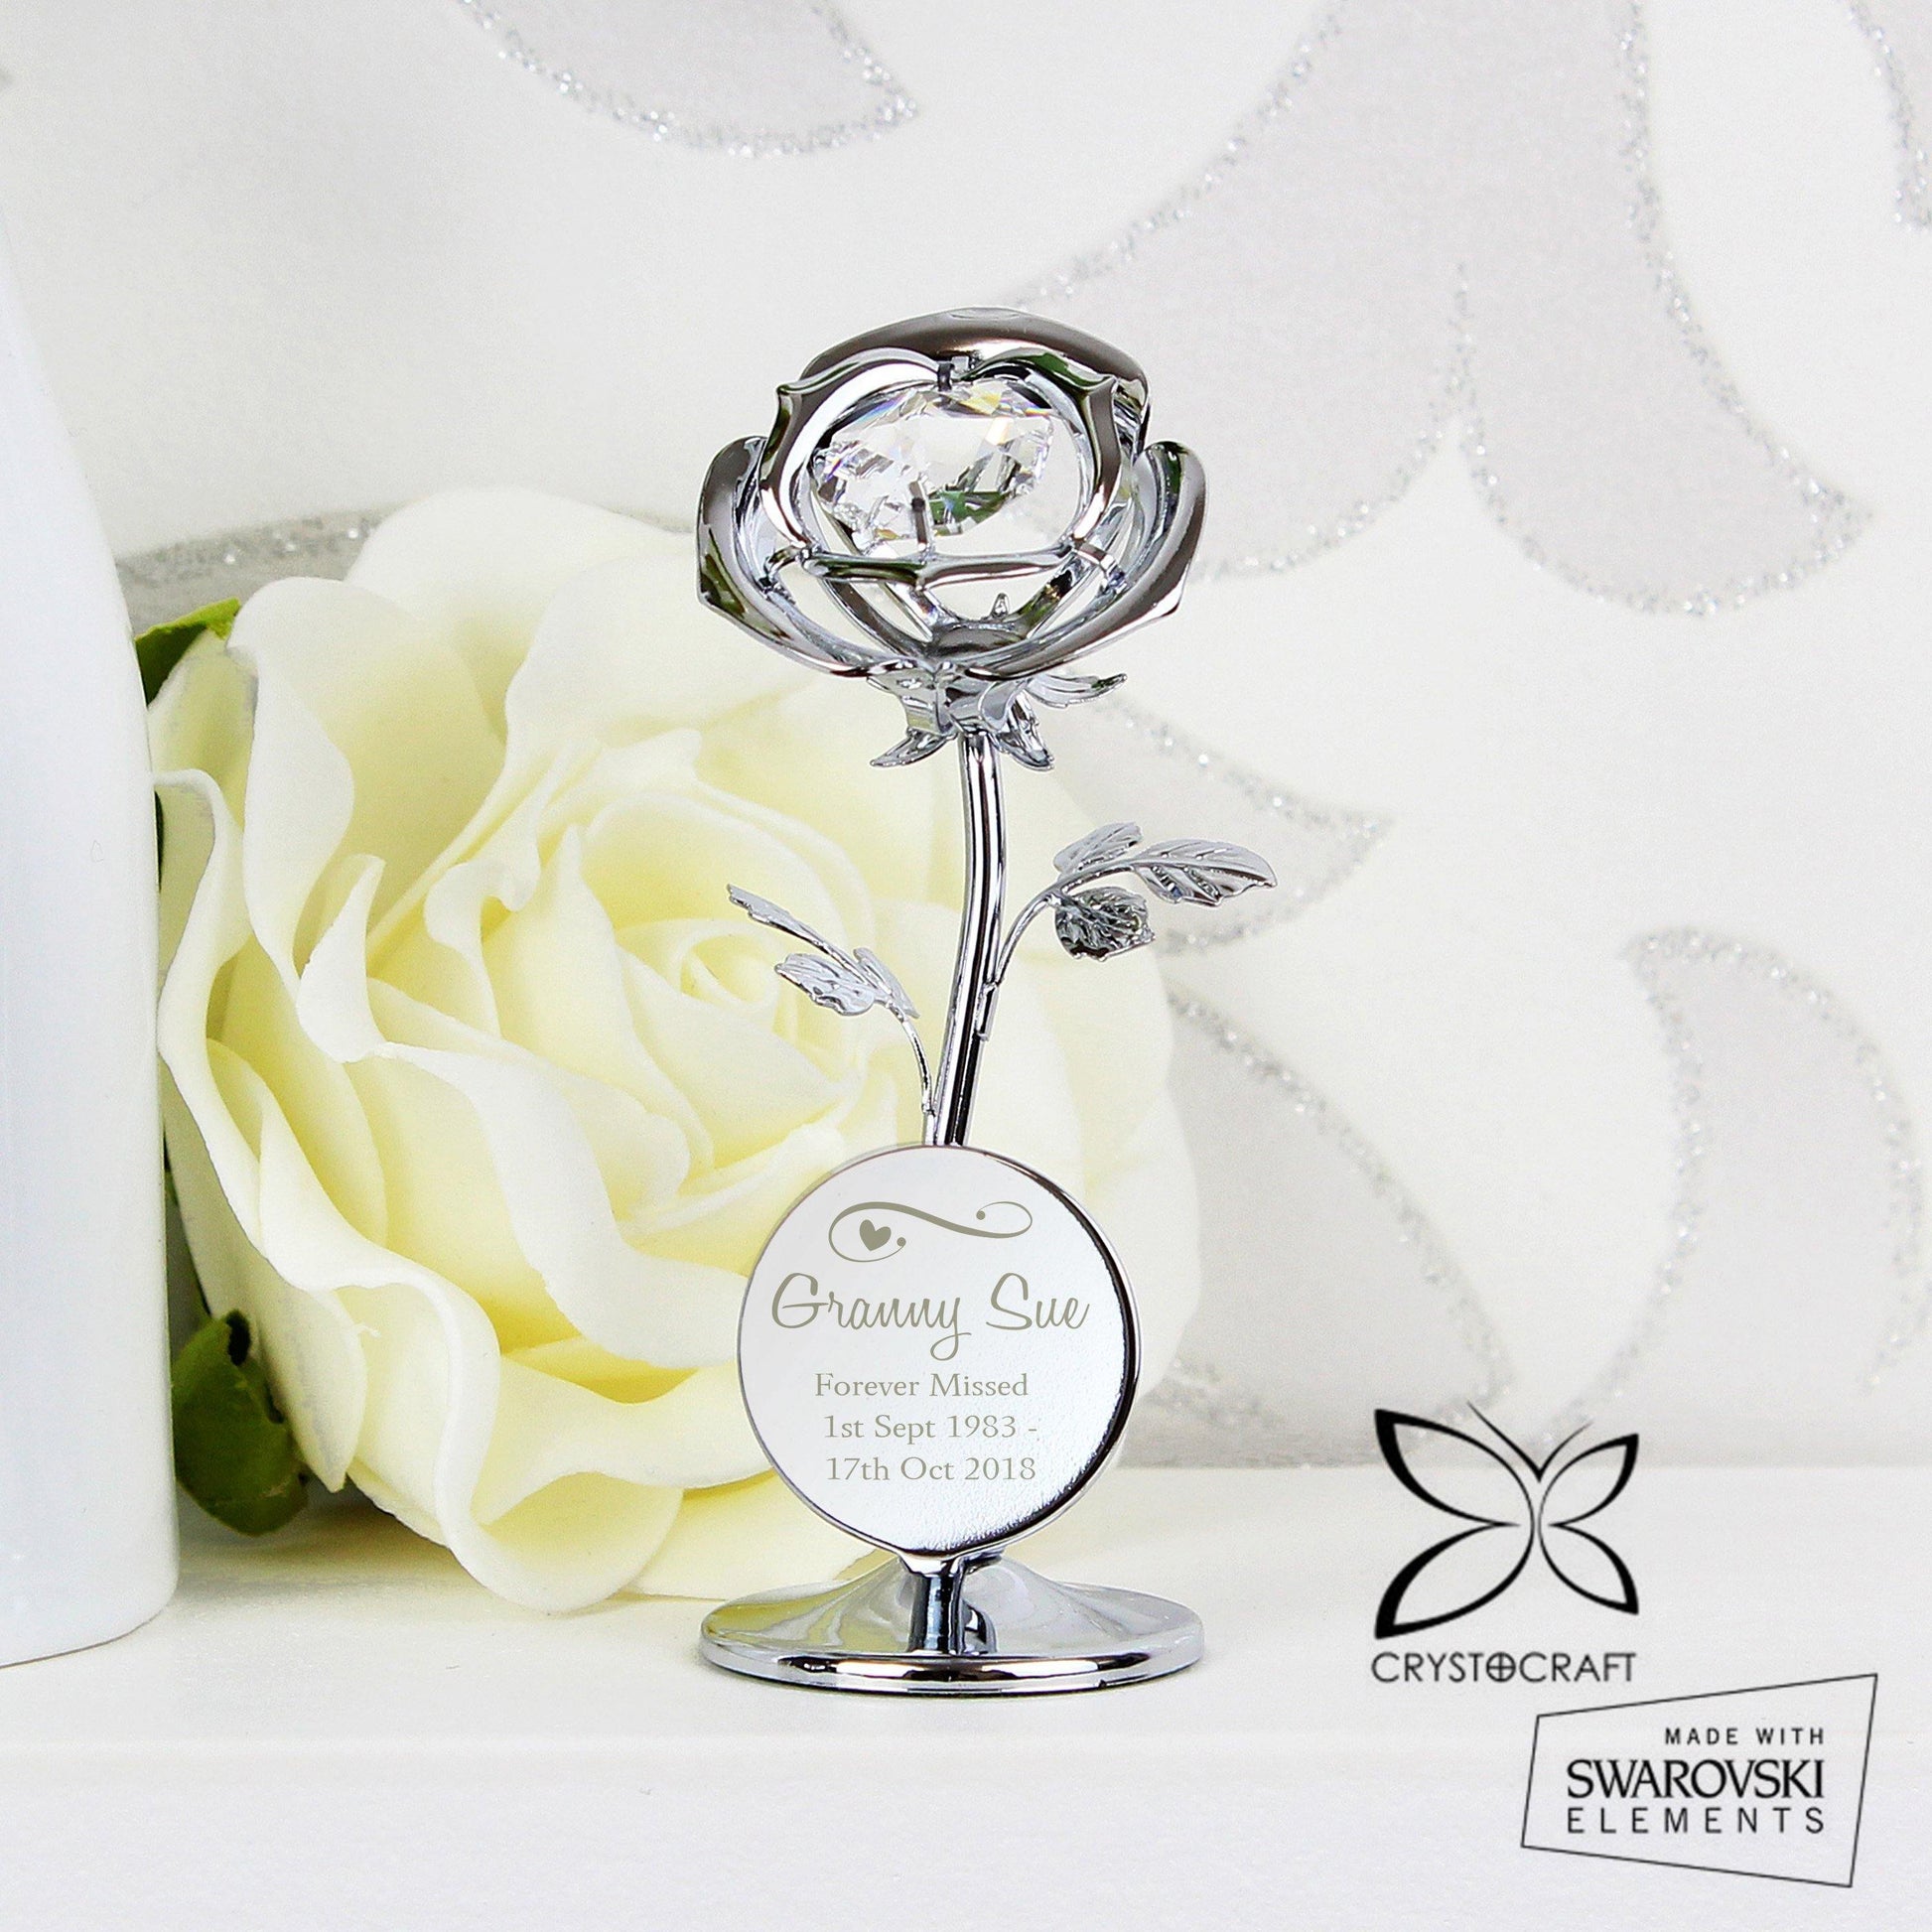 Personalised Silver Swirls & Hearts Crystocraft Rose Ornament - Kporium Home & Garden